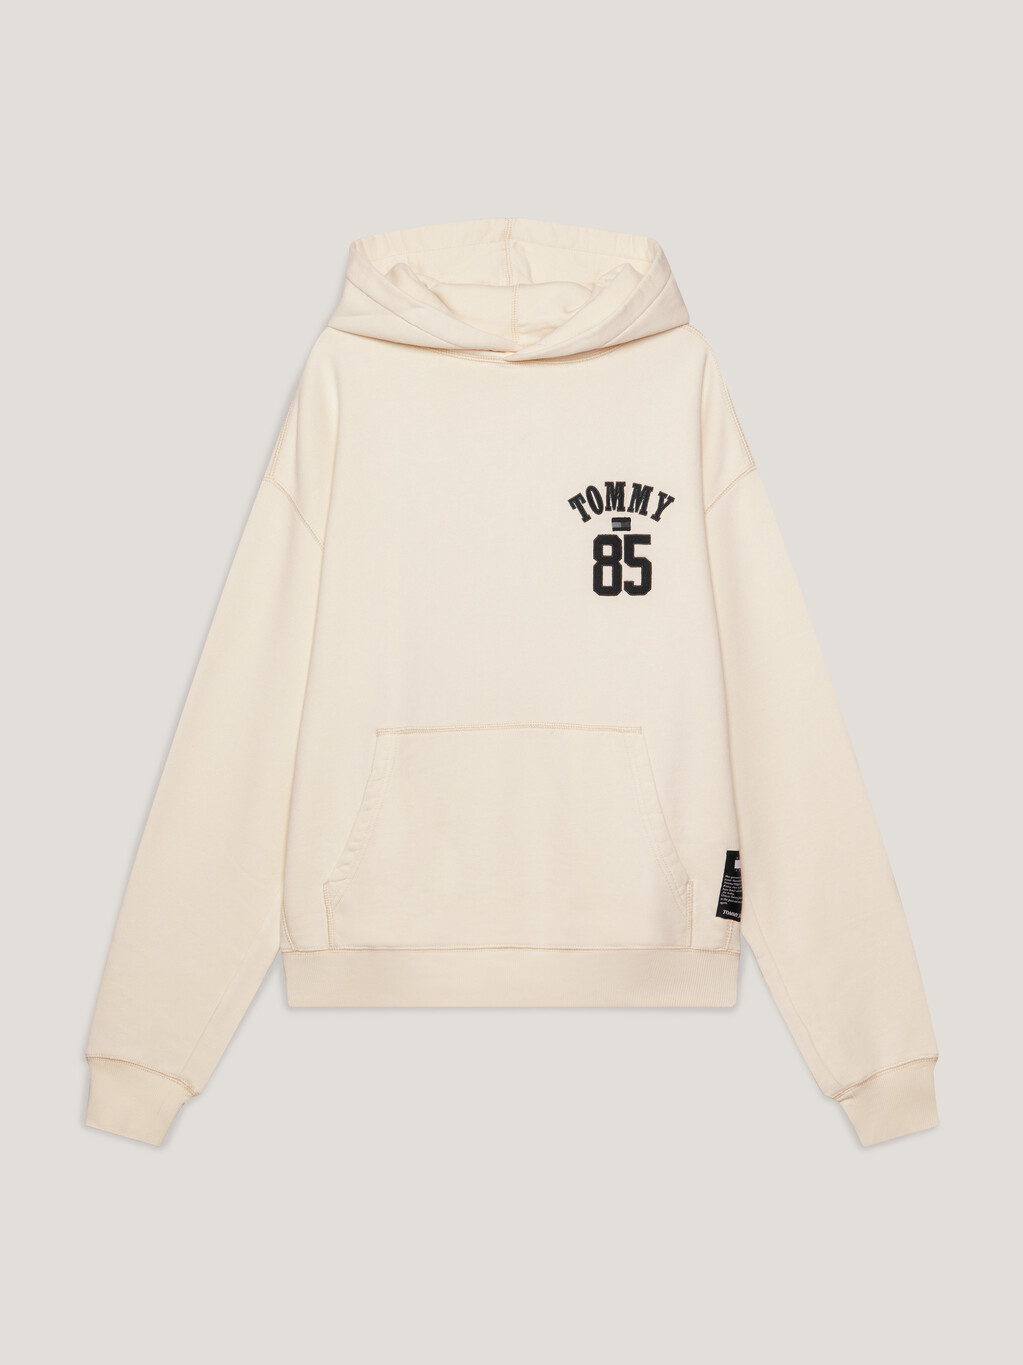 Tommy Remastered Dual Gender 1985 Collection Hoody, Antique Ivory, hi-res